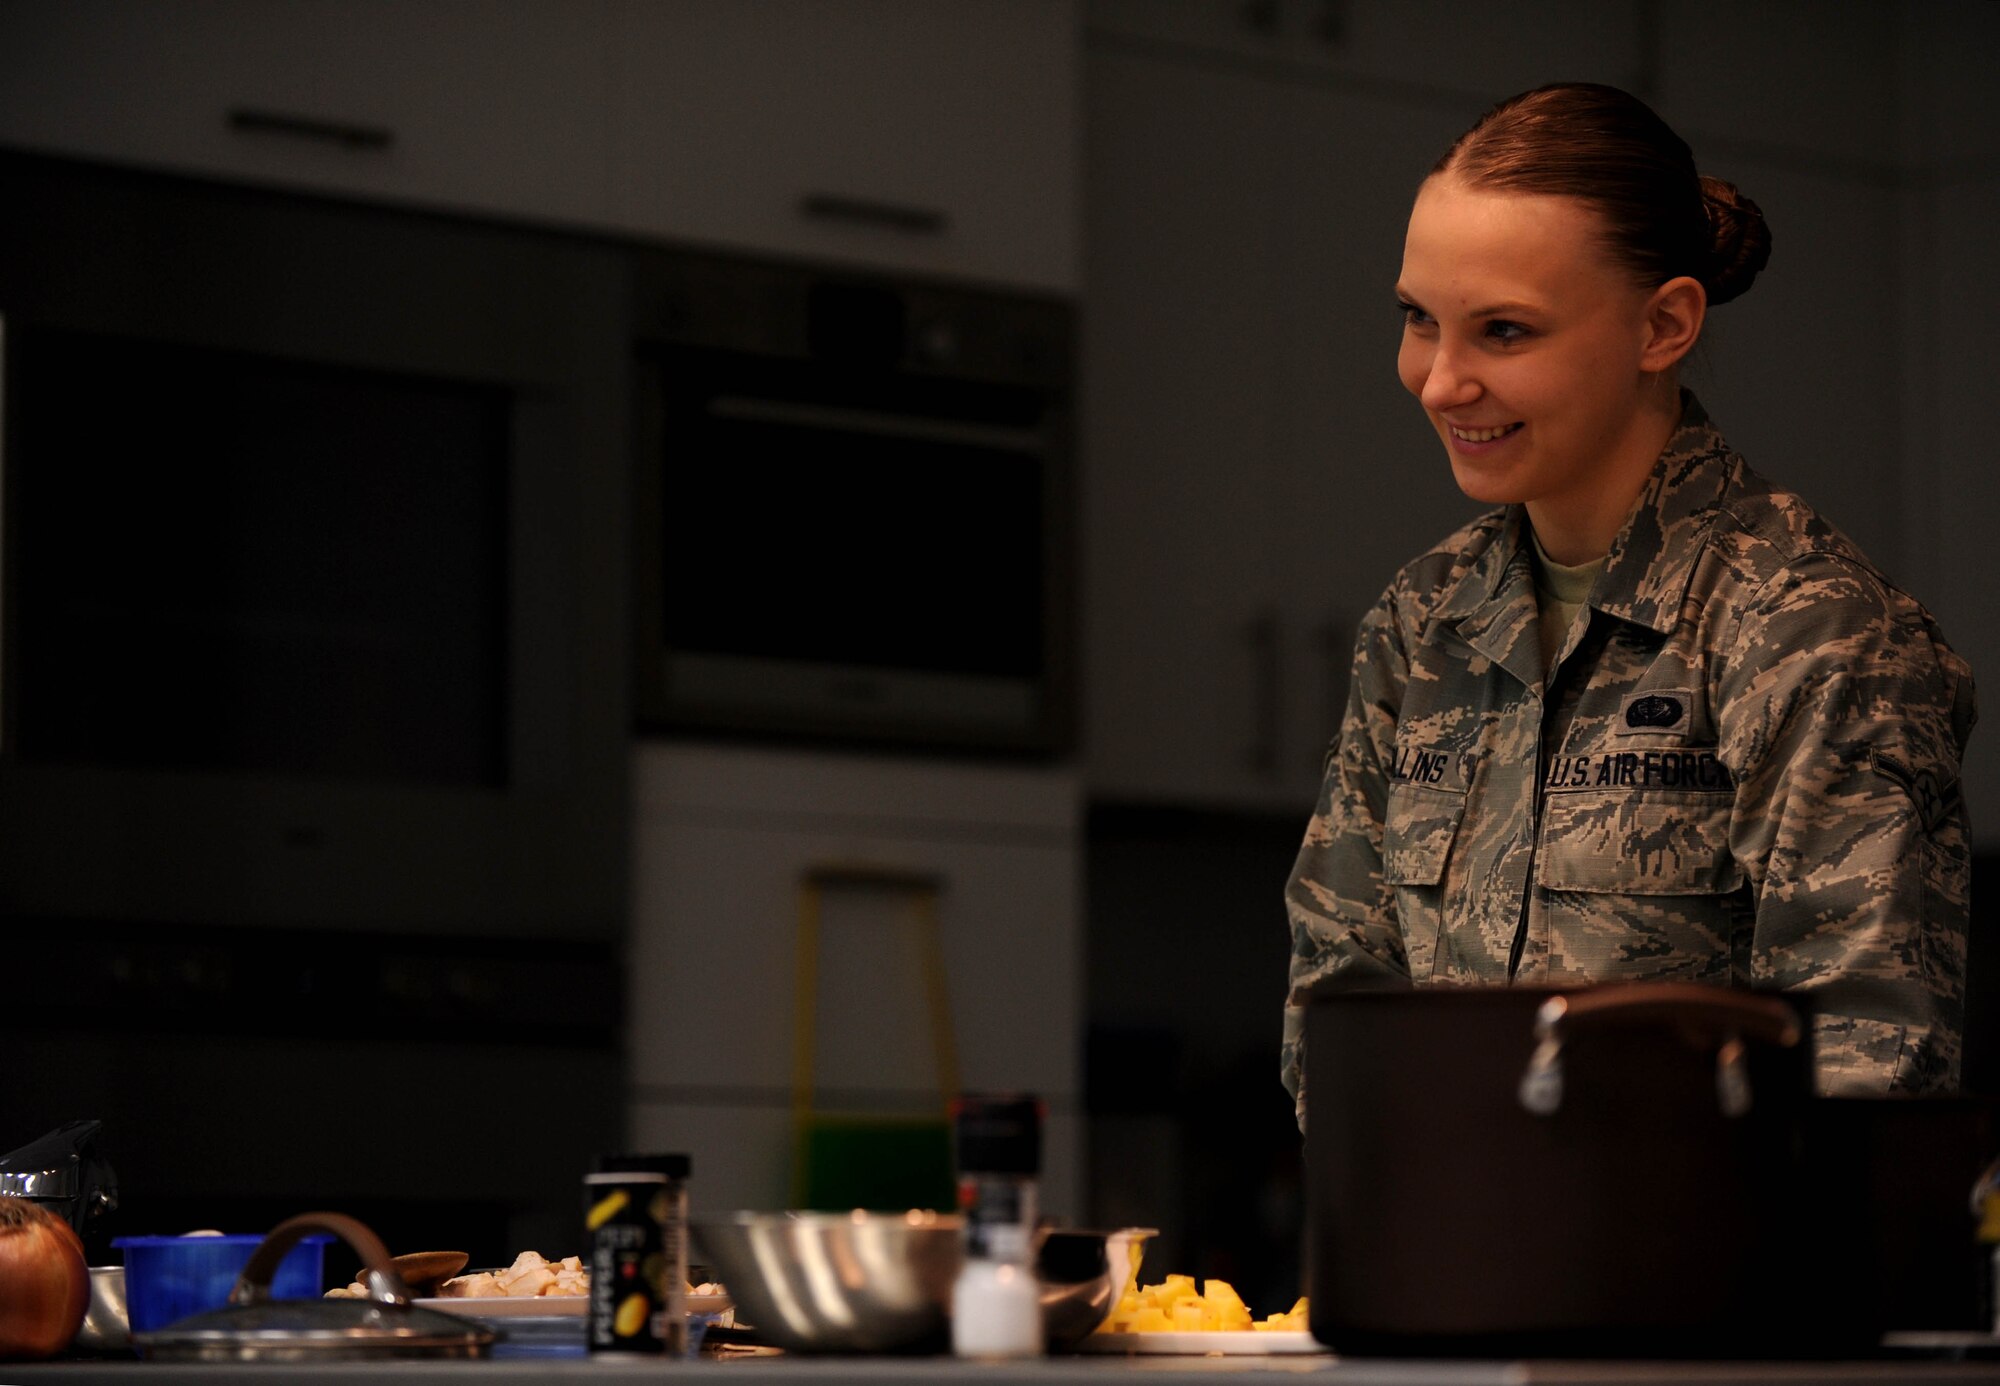 U.S. Air Force Airman Kimberly Collins, 52nd Force Support Squadron fitness apprentice, answers questions from the audience during a cooking demonstration at the Health Promotions Kitchen in the Eifel Powerhaus at Spangdahlem Air Base, Germany, Feb. 11, 2015. Collins cooked for a demonstration event as part of the Largest Loser Campaign, a collaborative effort of the Health Promotion’s office and the fitness center designed to aid individuals seeking a healthier lifestyle. The demonstration included a chicken-pot-pie soup and whole-wheat buttermilk cheese biscuits as healthier substitutions to an actual chicken-pot-pie and its crust. (U.S. Air Force photo by Airman 1st Class Timothy Kim/Released)